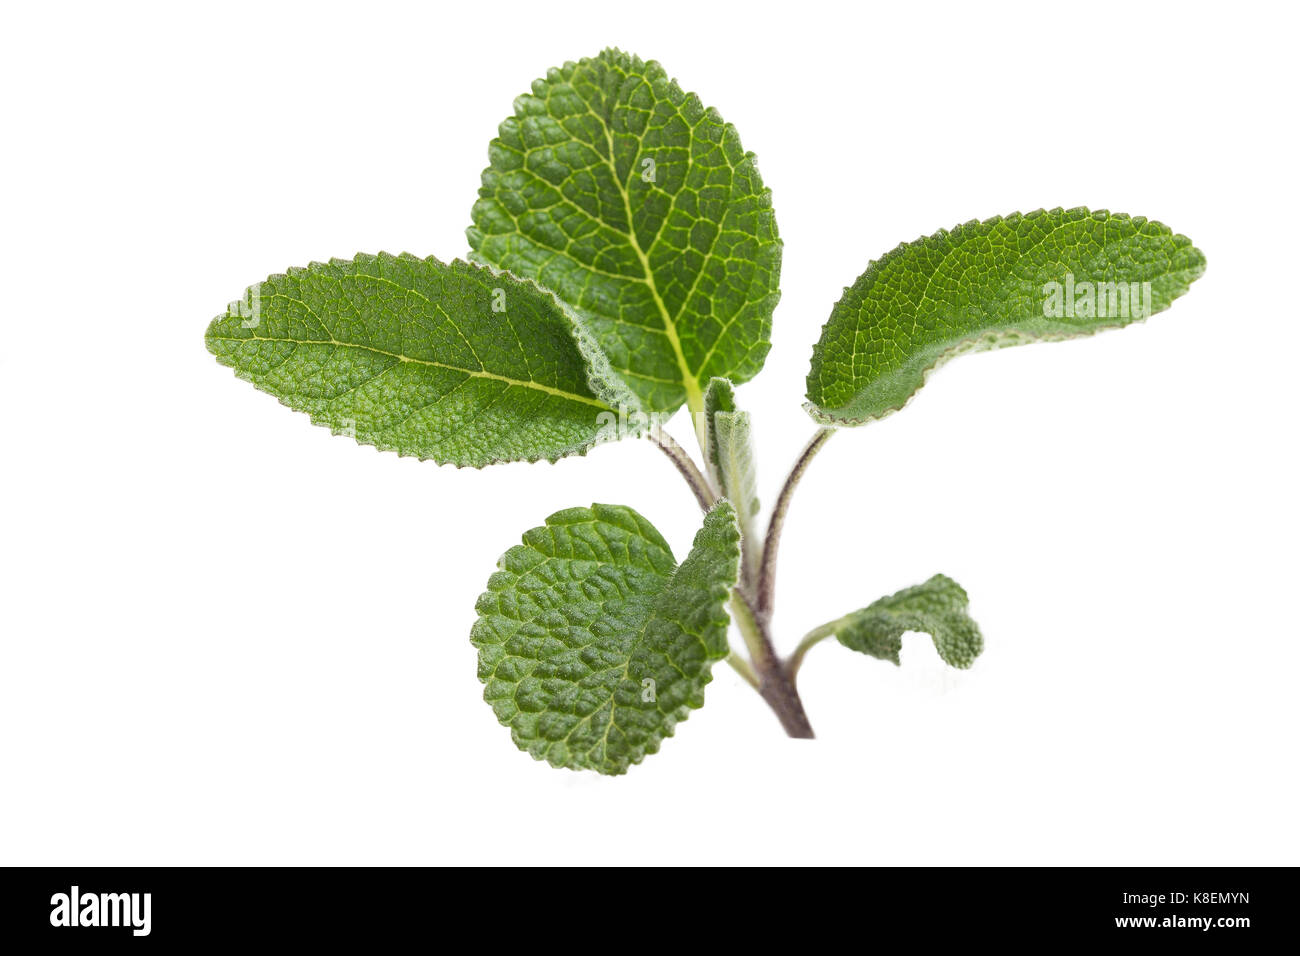 Top view - bundle of sage leaves on white background Stock Photo